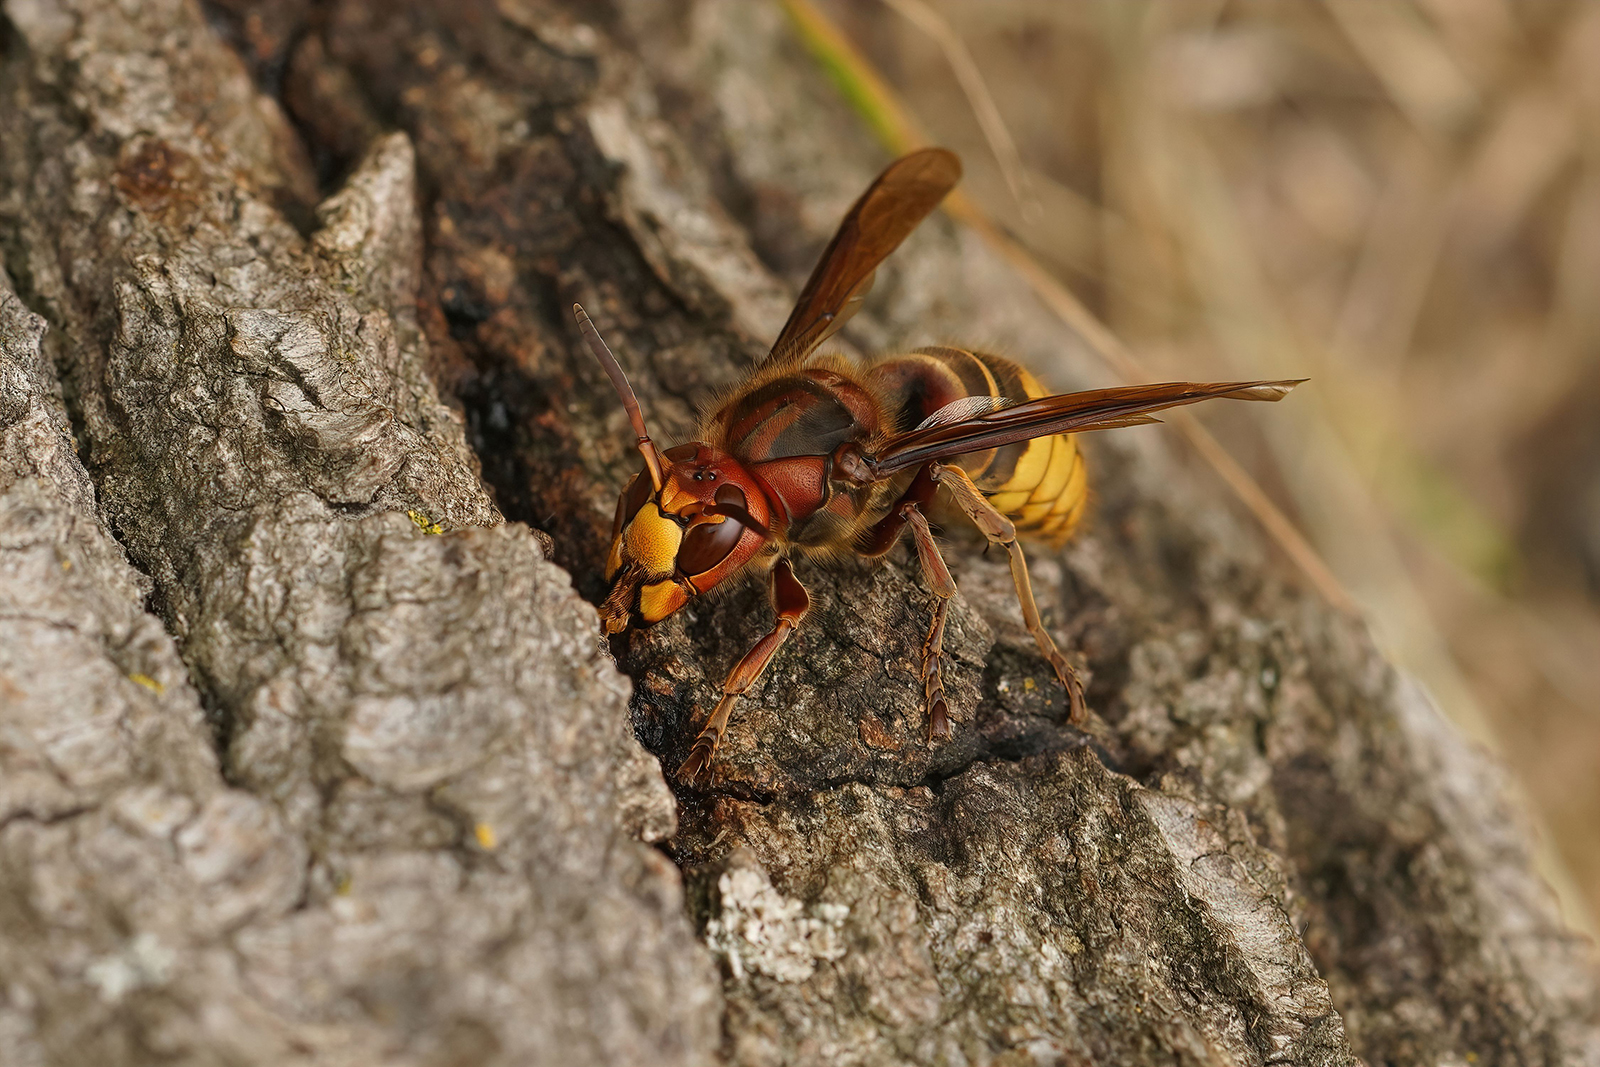 Can wasps sting through clothes?